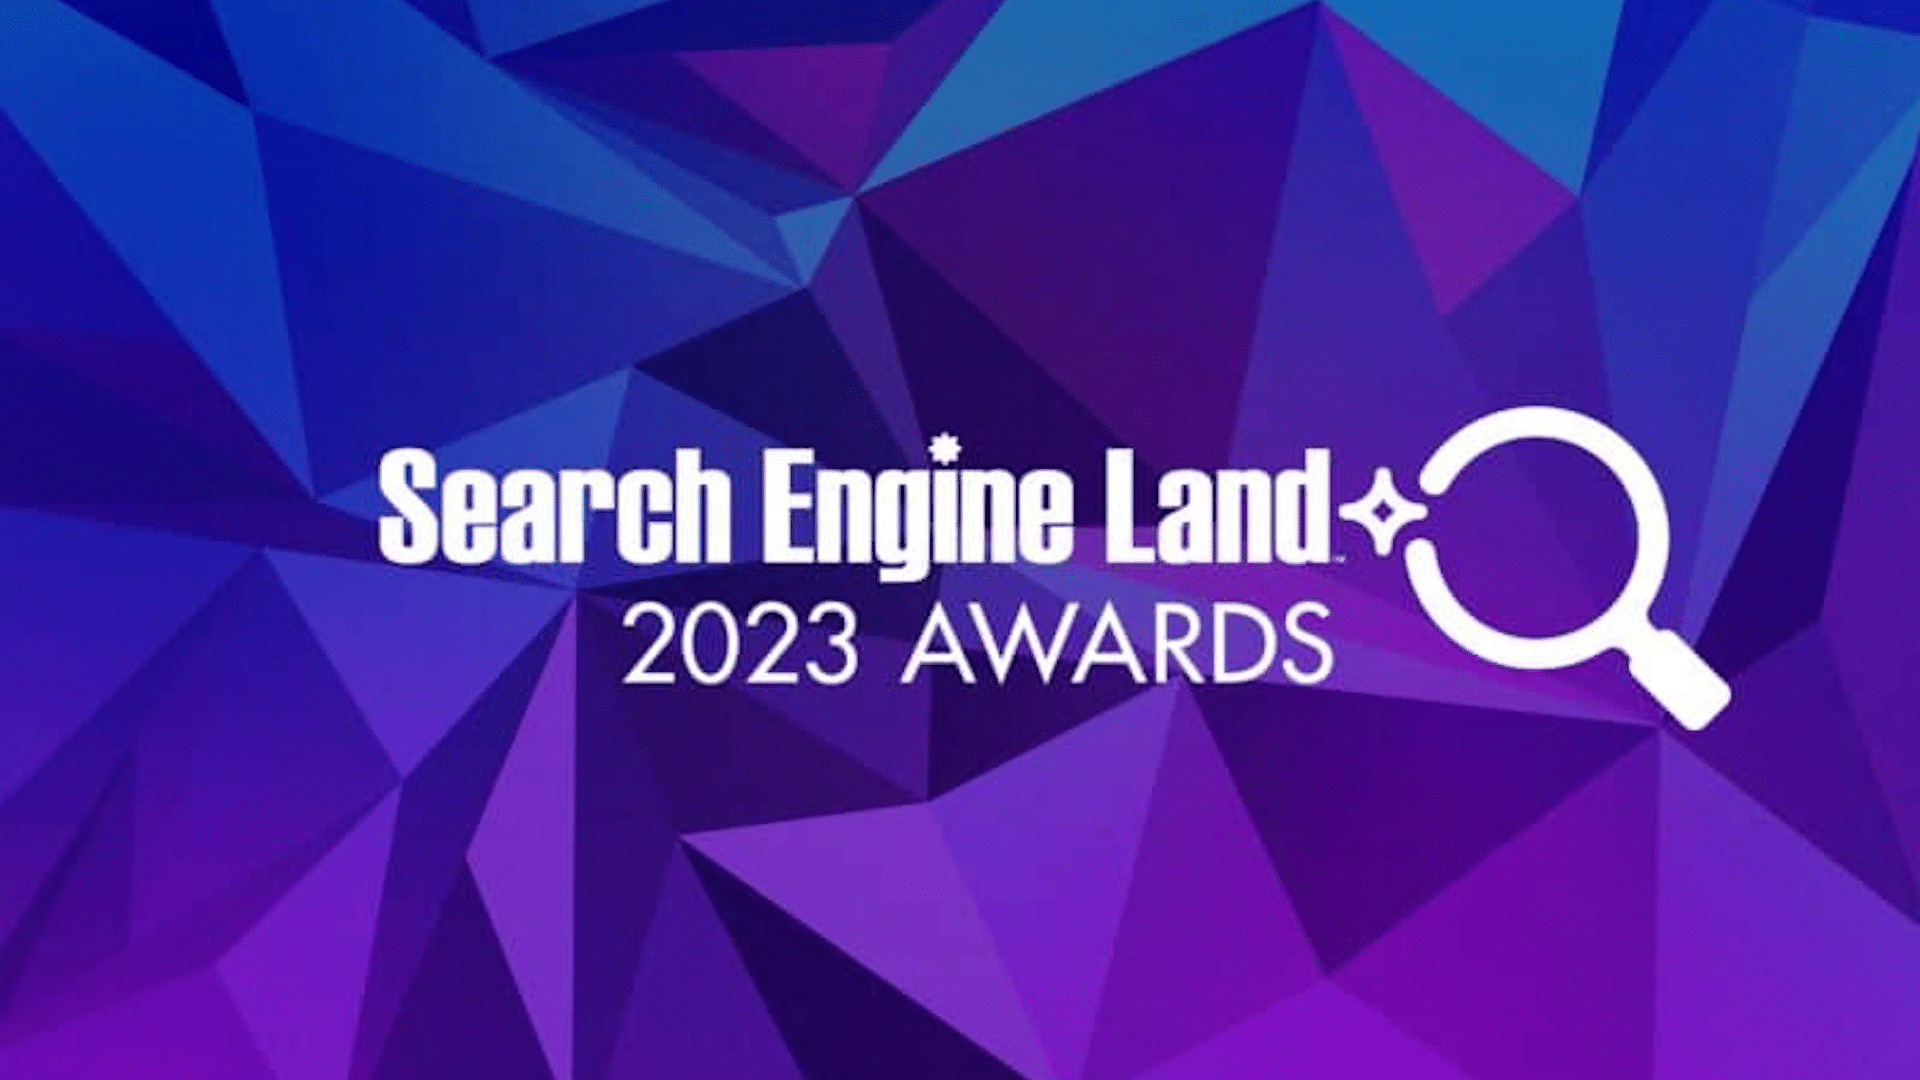 Search Engine Land Awards 2023: And the winners are…